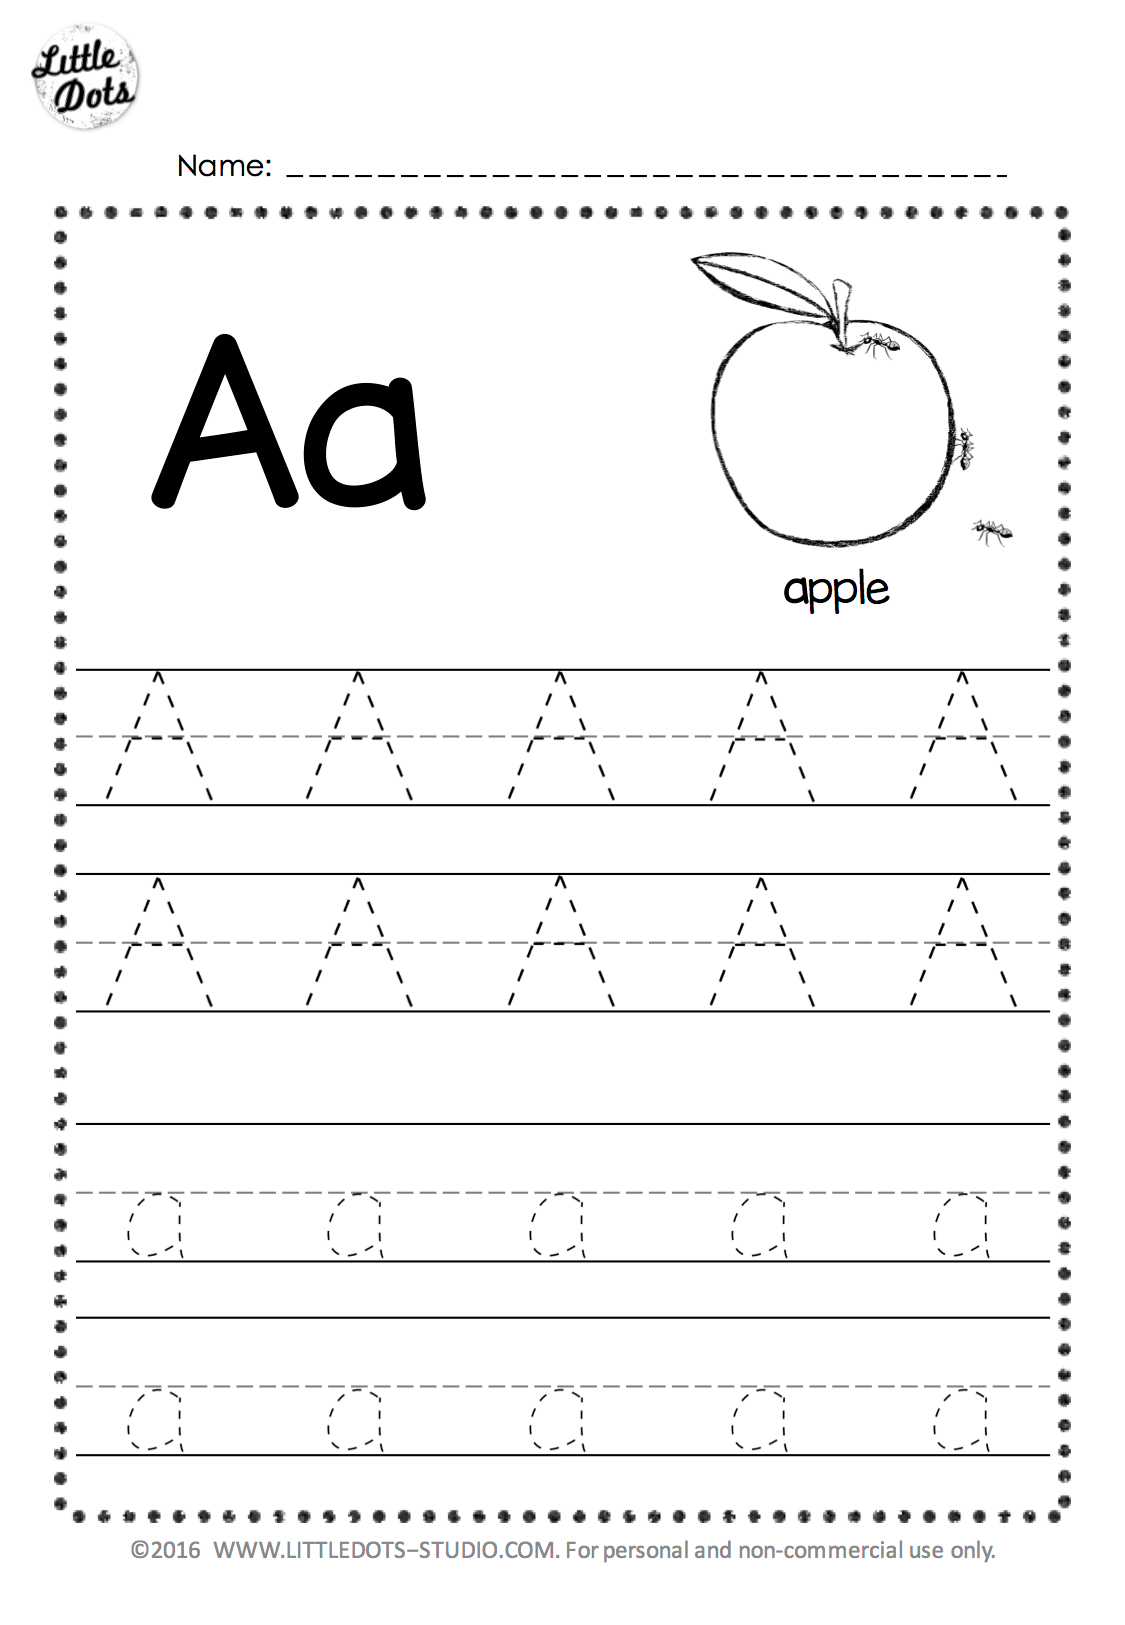 Download Free Letter A Tracing Worksheets For Preschool, Pre